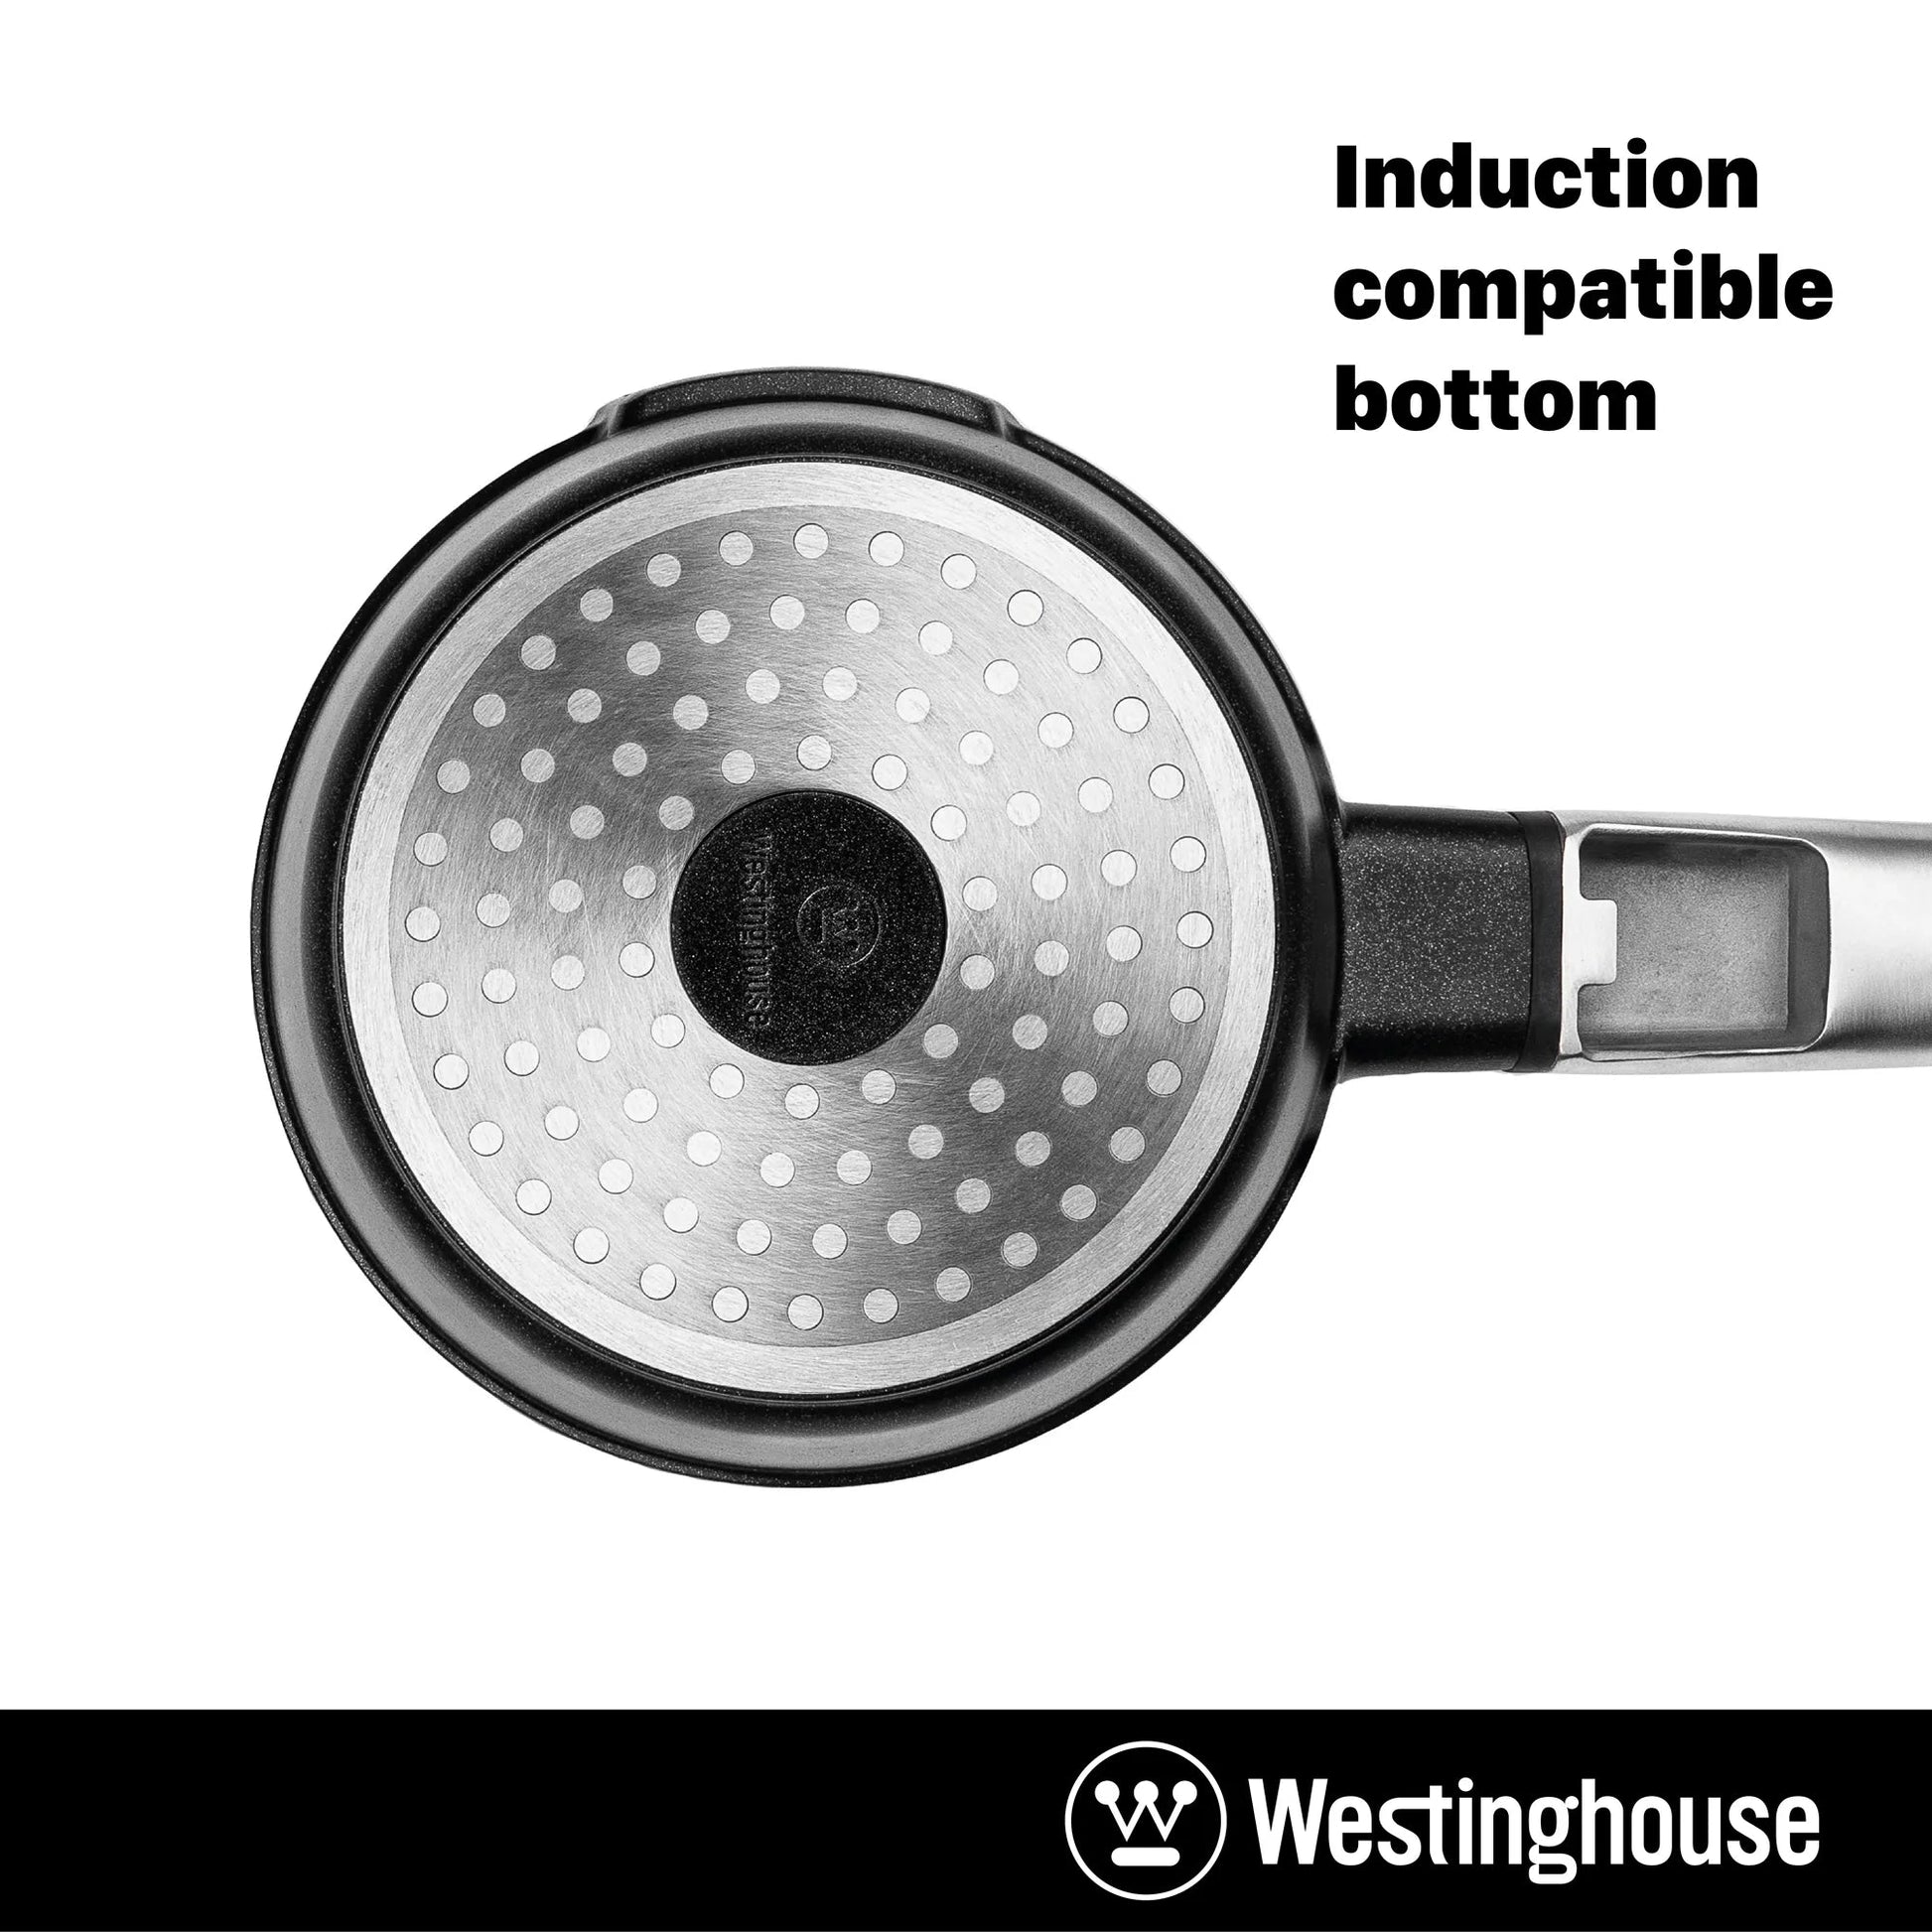 Westinghouse WH-3 Carbon Steel Baking Pan Set with 1 Square Pan 1 Muffin Tray & 1 Regtangle Deep Tray Premium Non-Stick Coating - 3 Piece